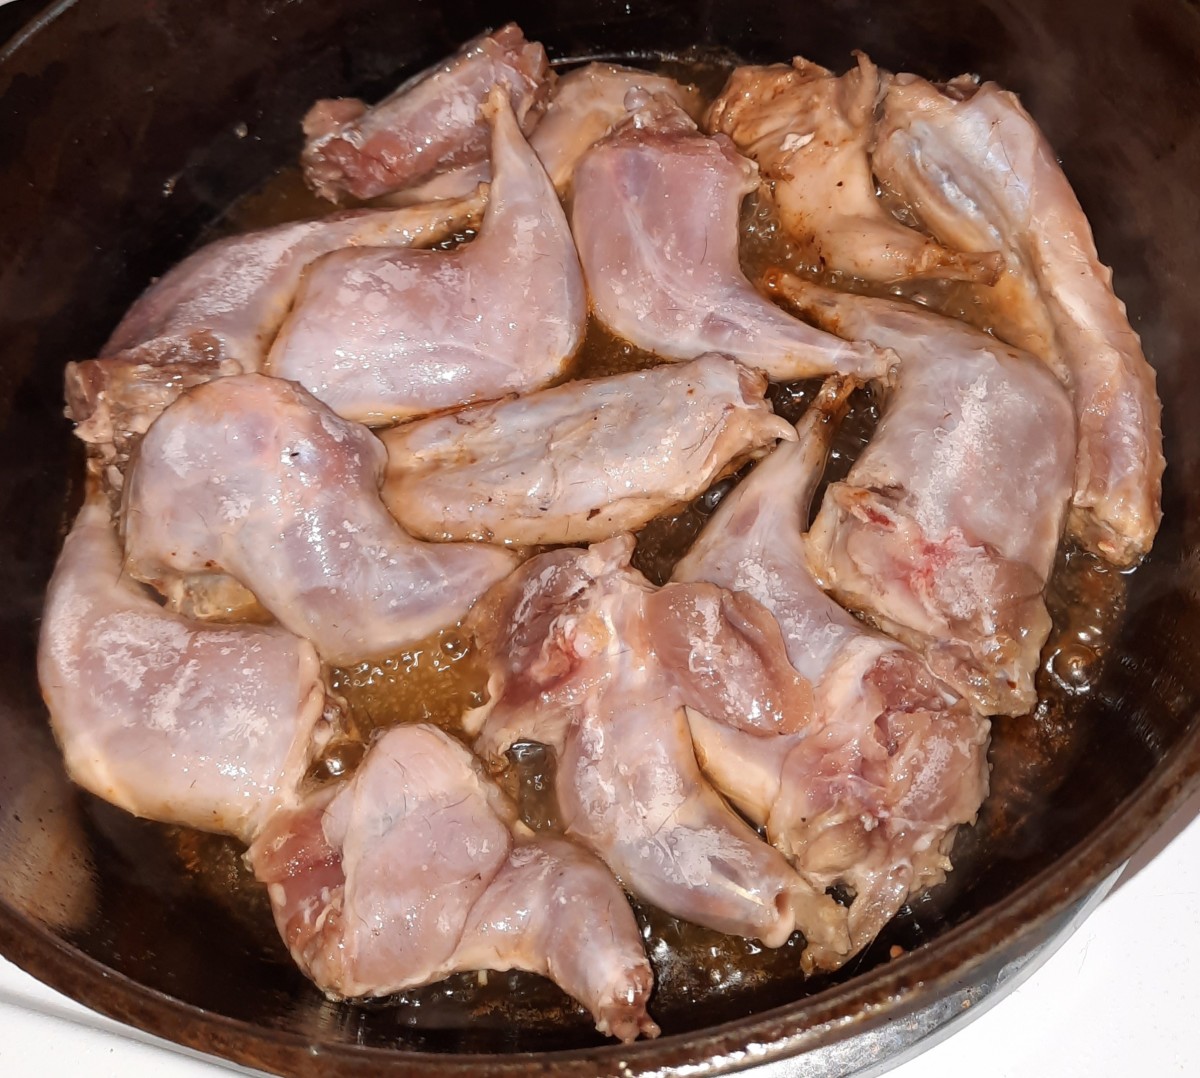 The larger amount of meat in this version of fried squirrel pushes the smaller amount of grease higher up the skillet. So, less grease actually achieves more coverage.